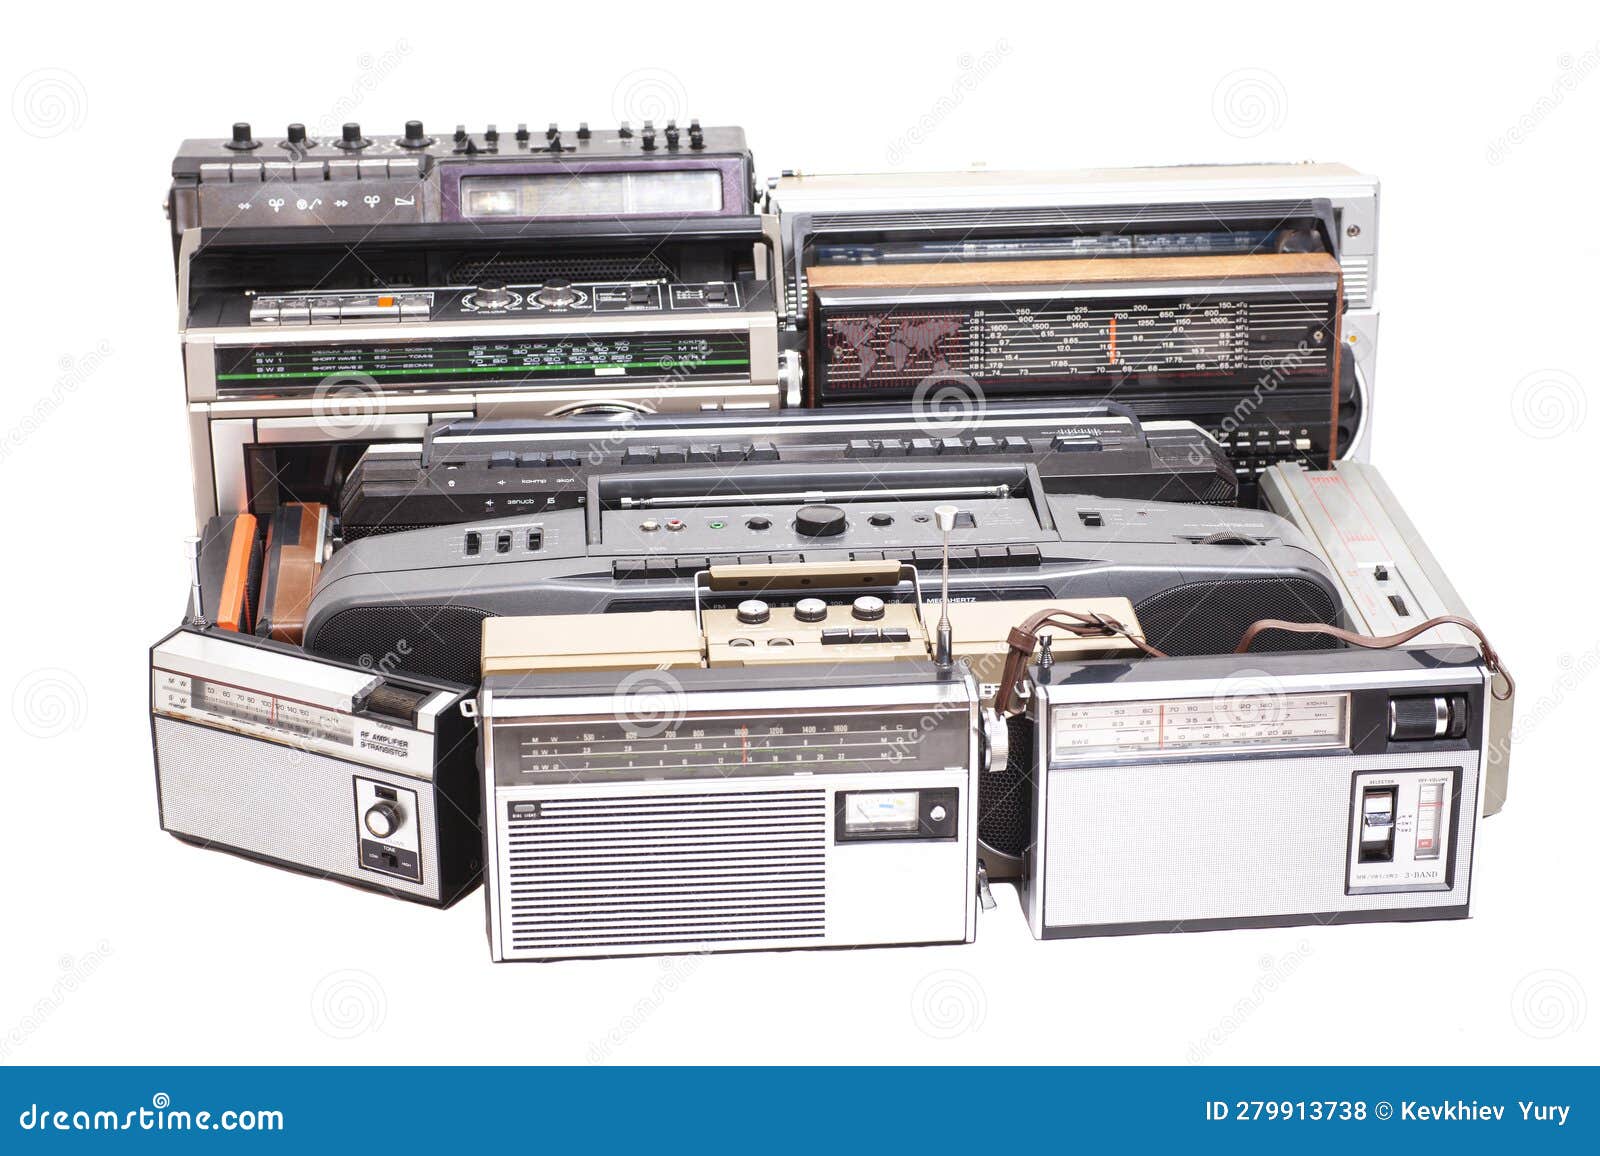 https://thumbs.dreamstime.com/z/collection-old-tape-recorders-transistor-radio-collection-old-tape-recorders-transistor-radio-279913738.jpg